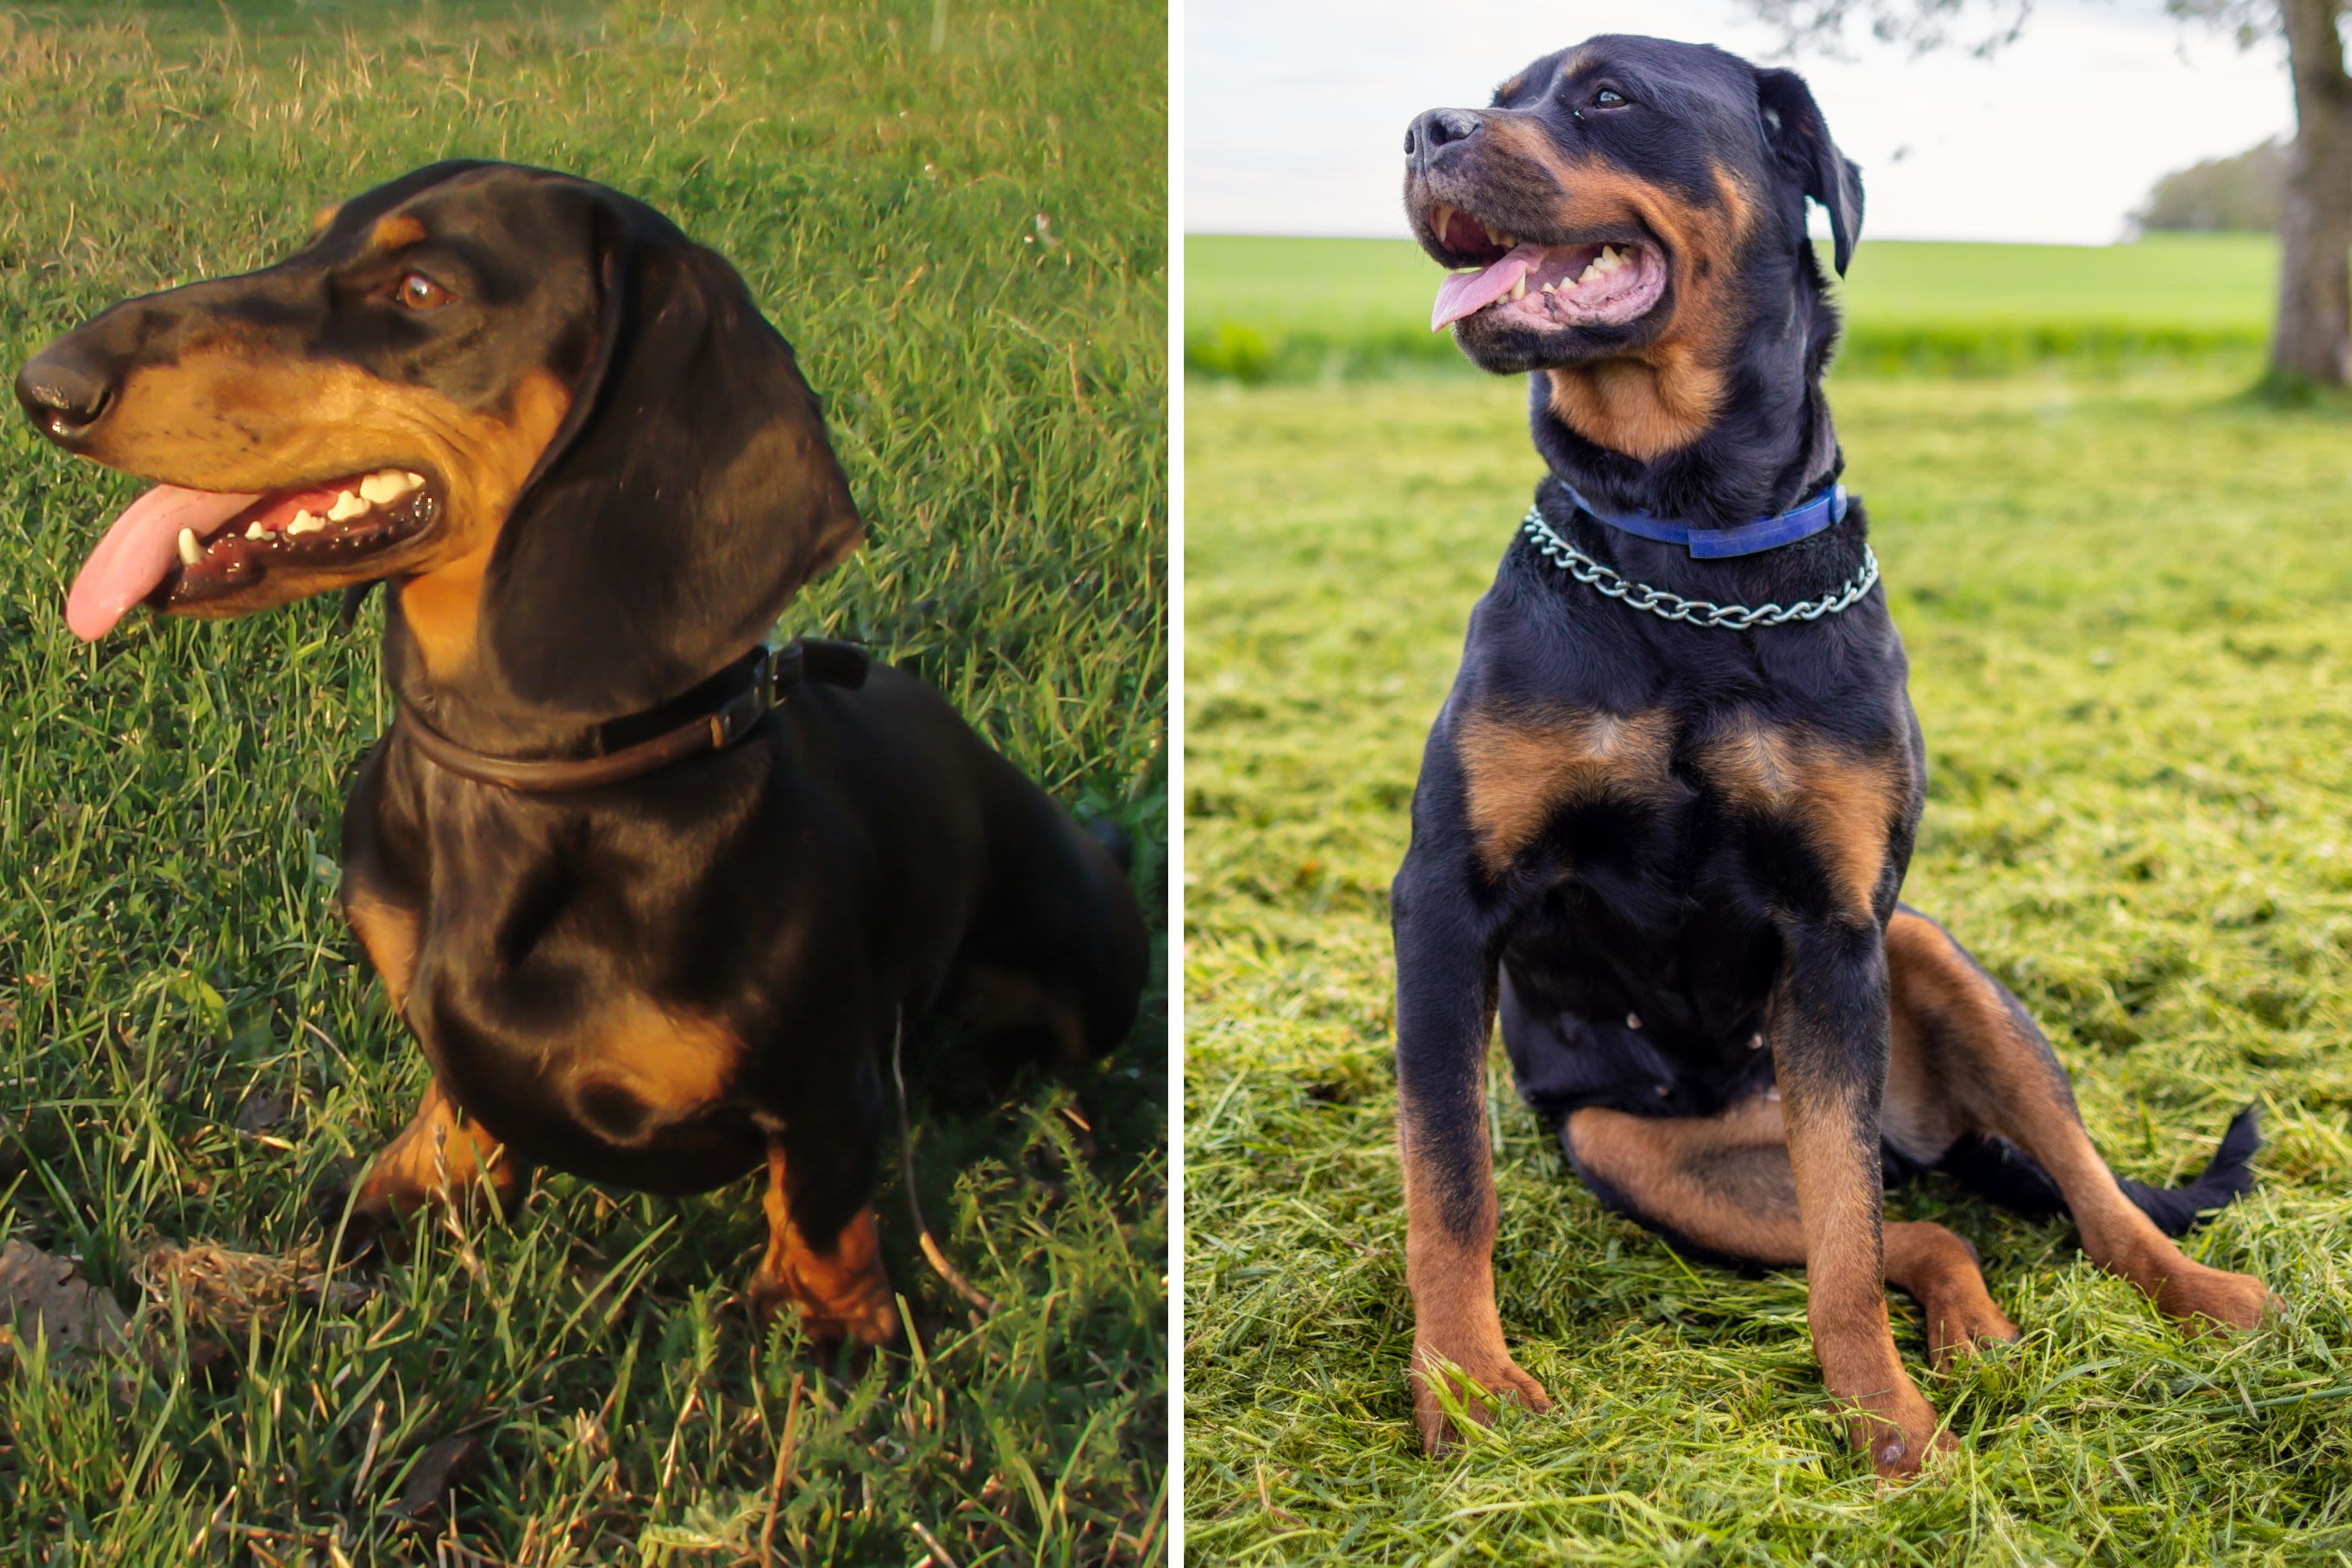 Dachshund, rottweiler have accidental litter: "Never seen anything like it"